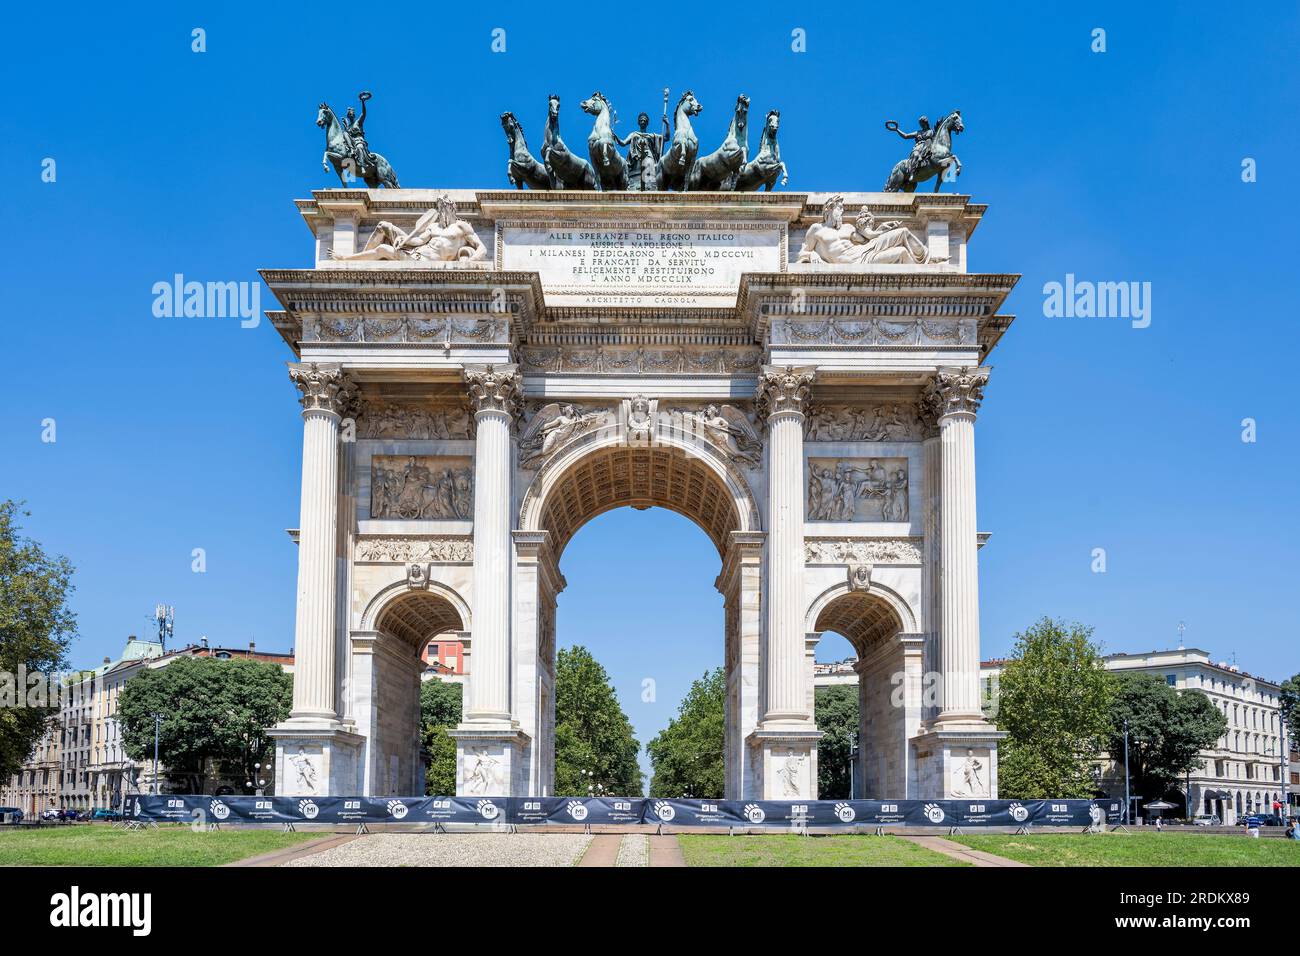 Arco della Pace triumphal arch, Milan, Lombardy, Italy Stock Photo